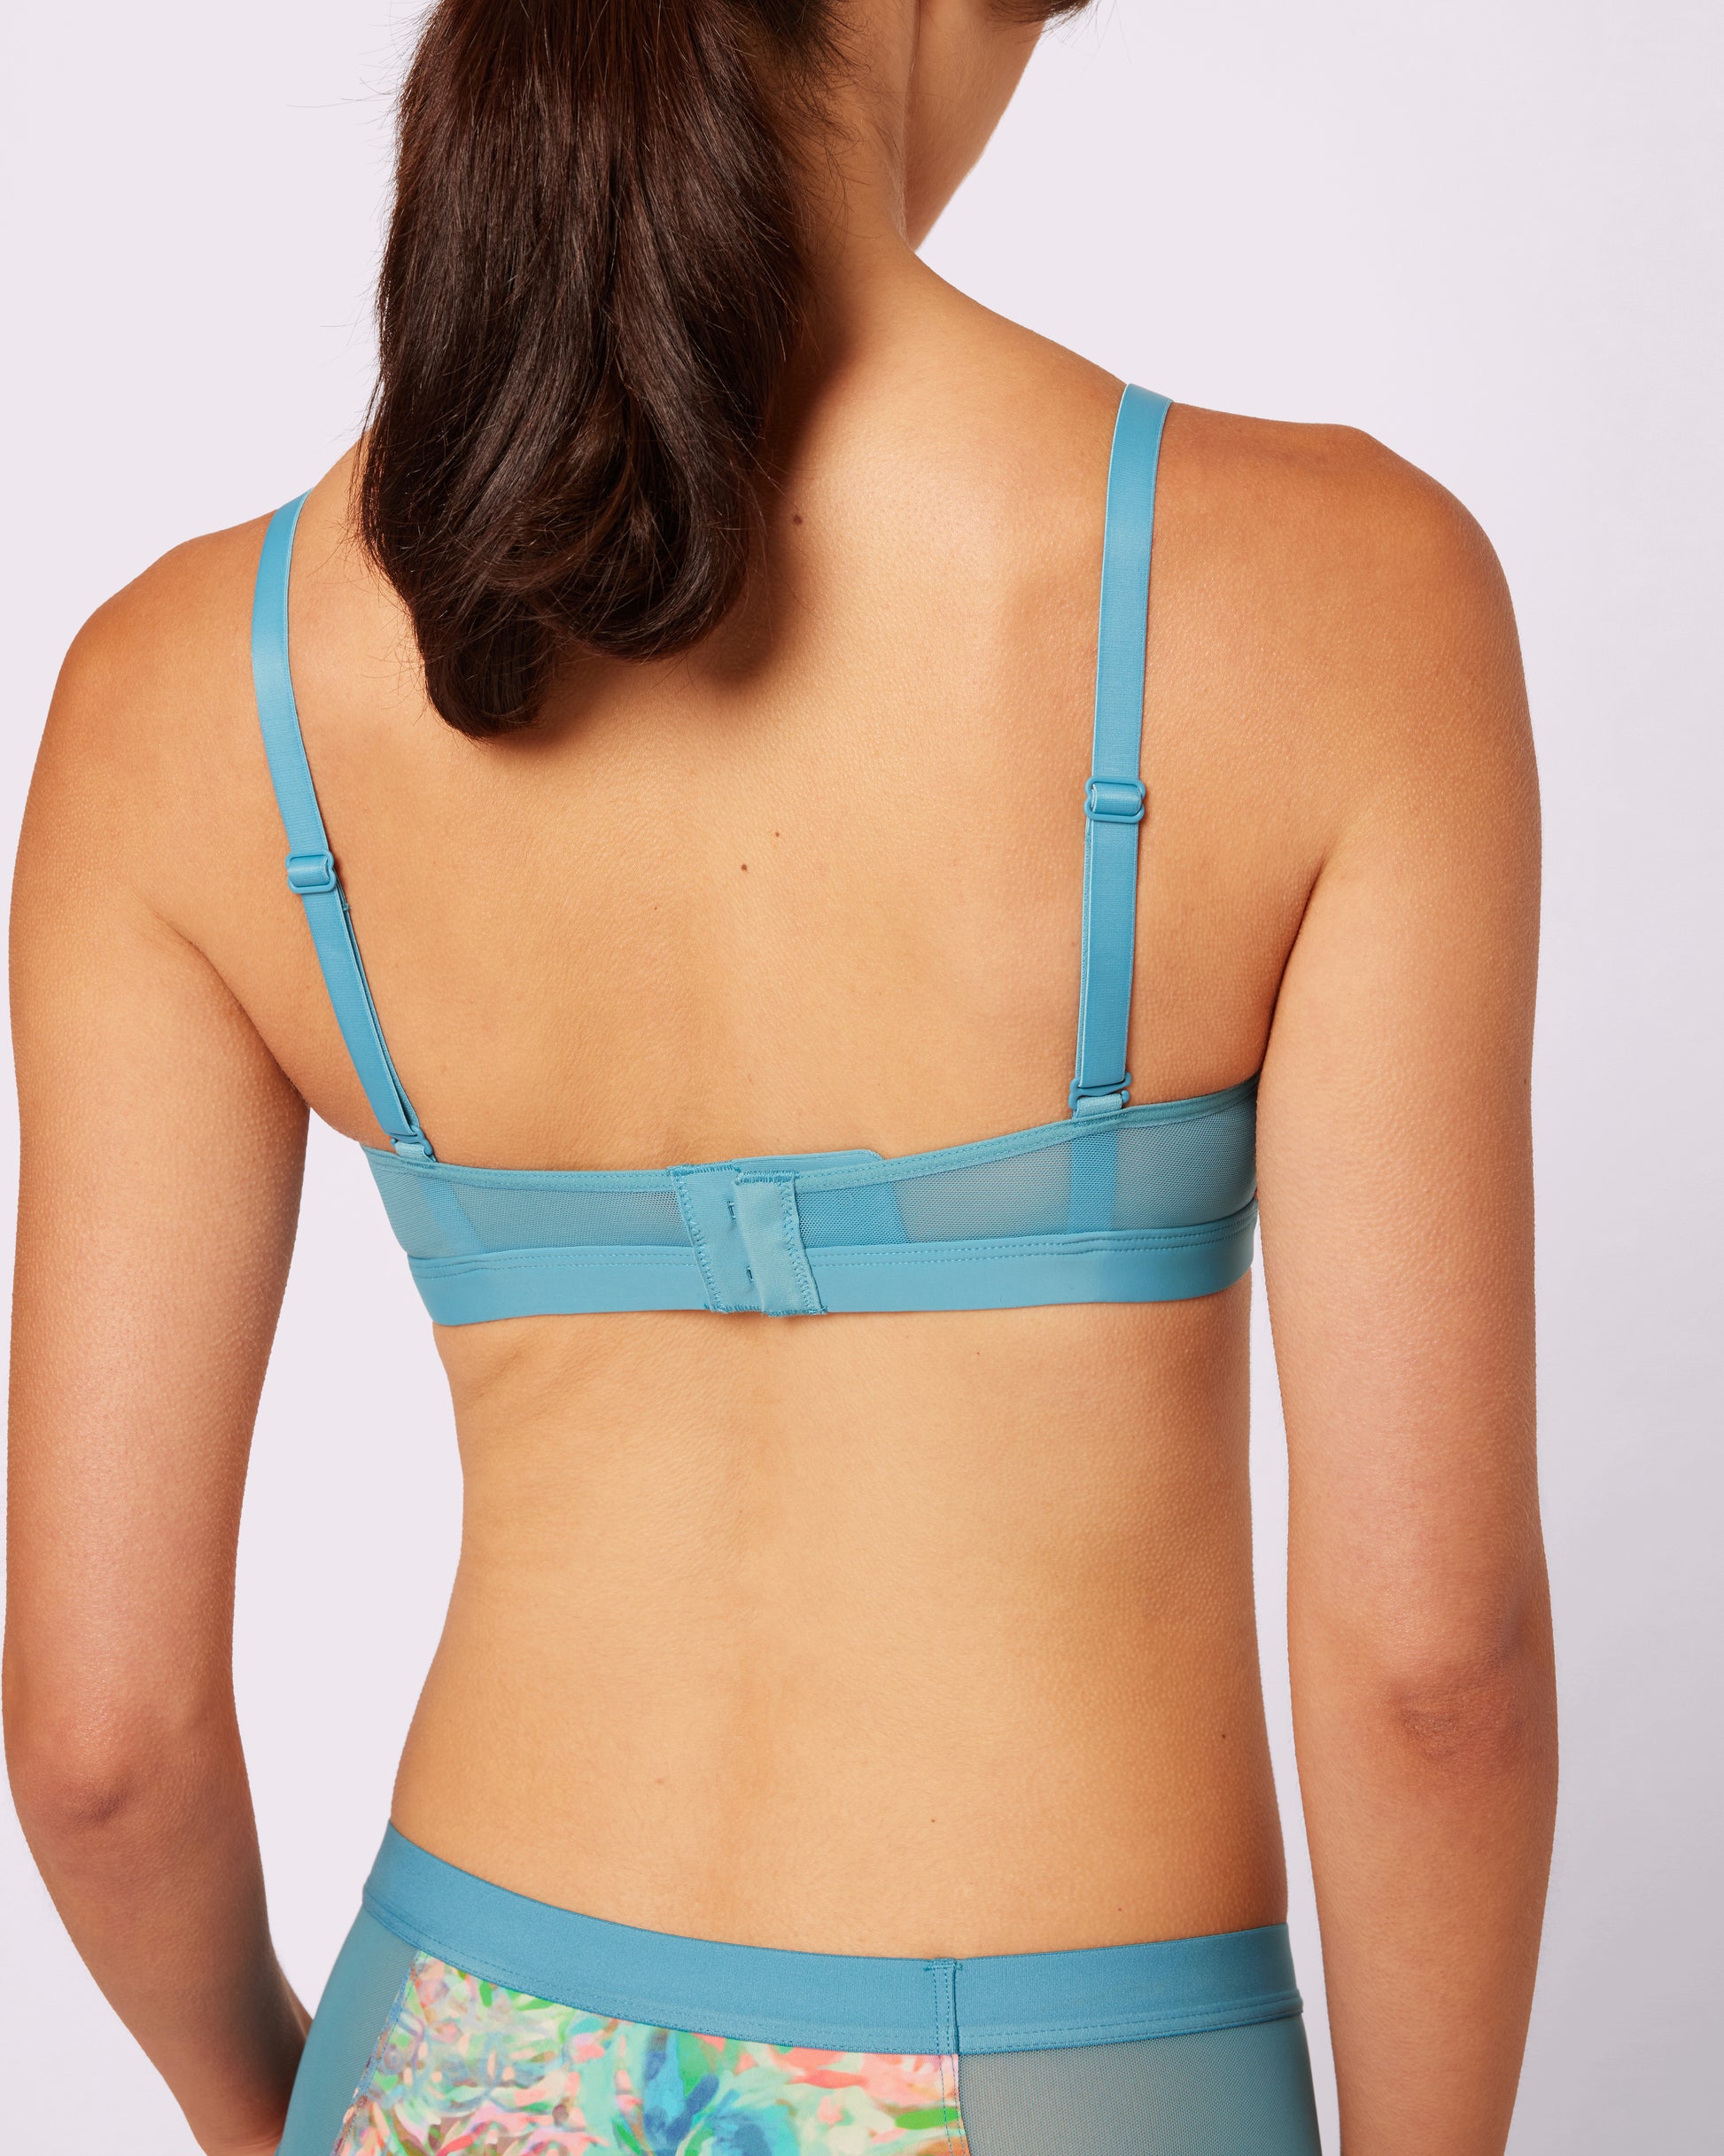 Parade Women's Re:play Triangle Wireless Bralette : Target